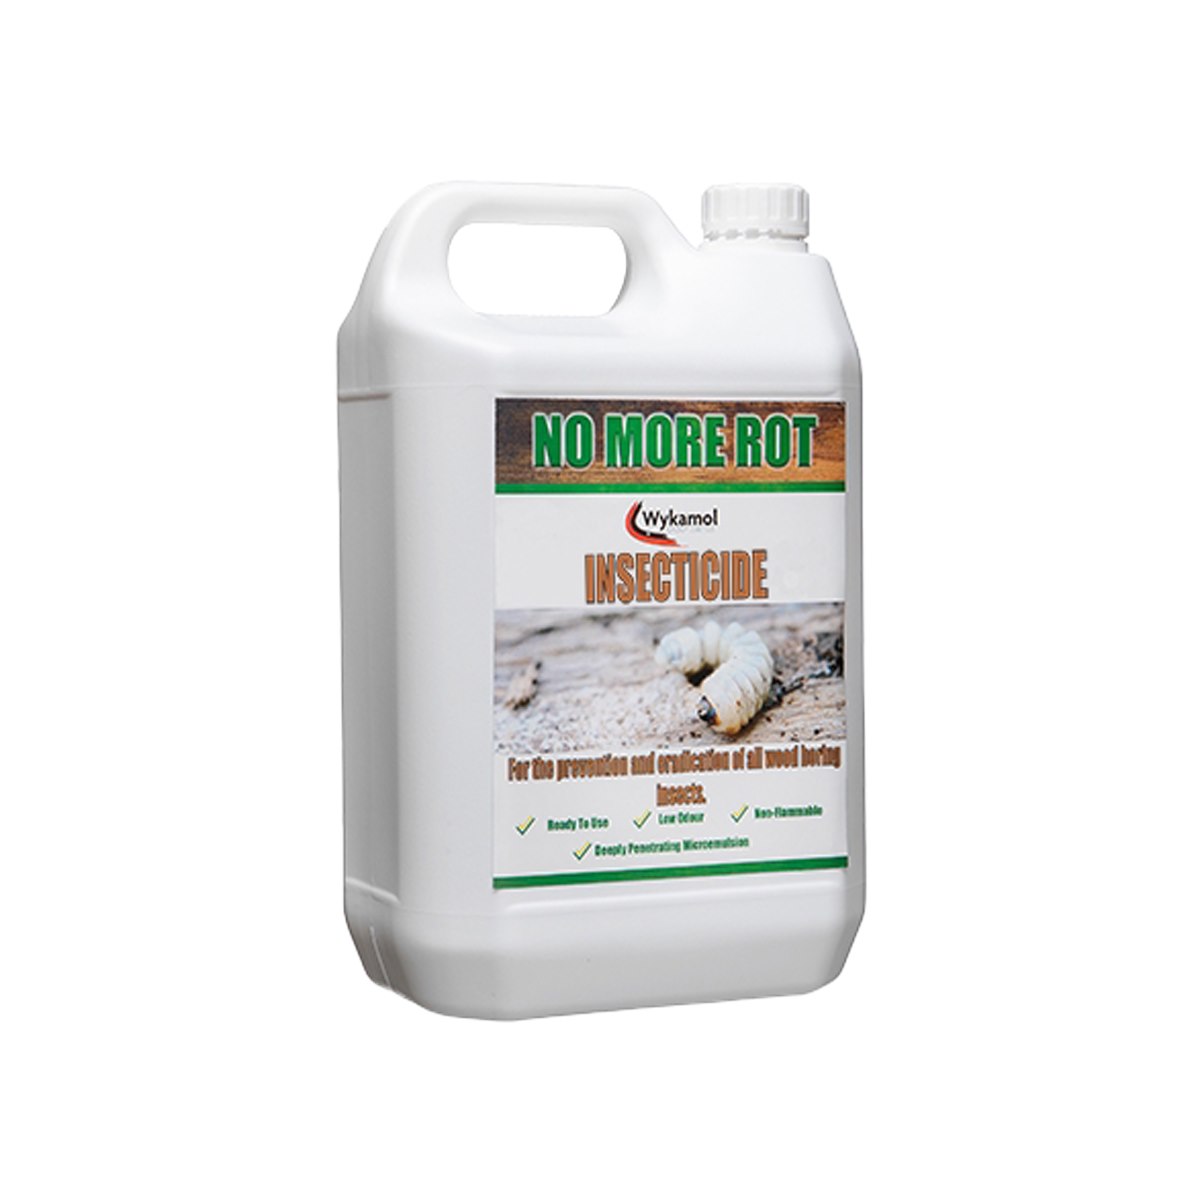 Wykamol No More Rot Insecticide Ready To Use 5 Litre